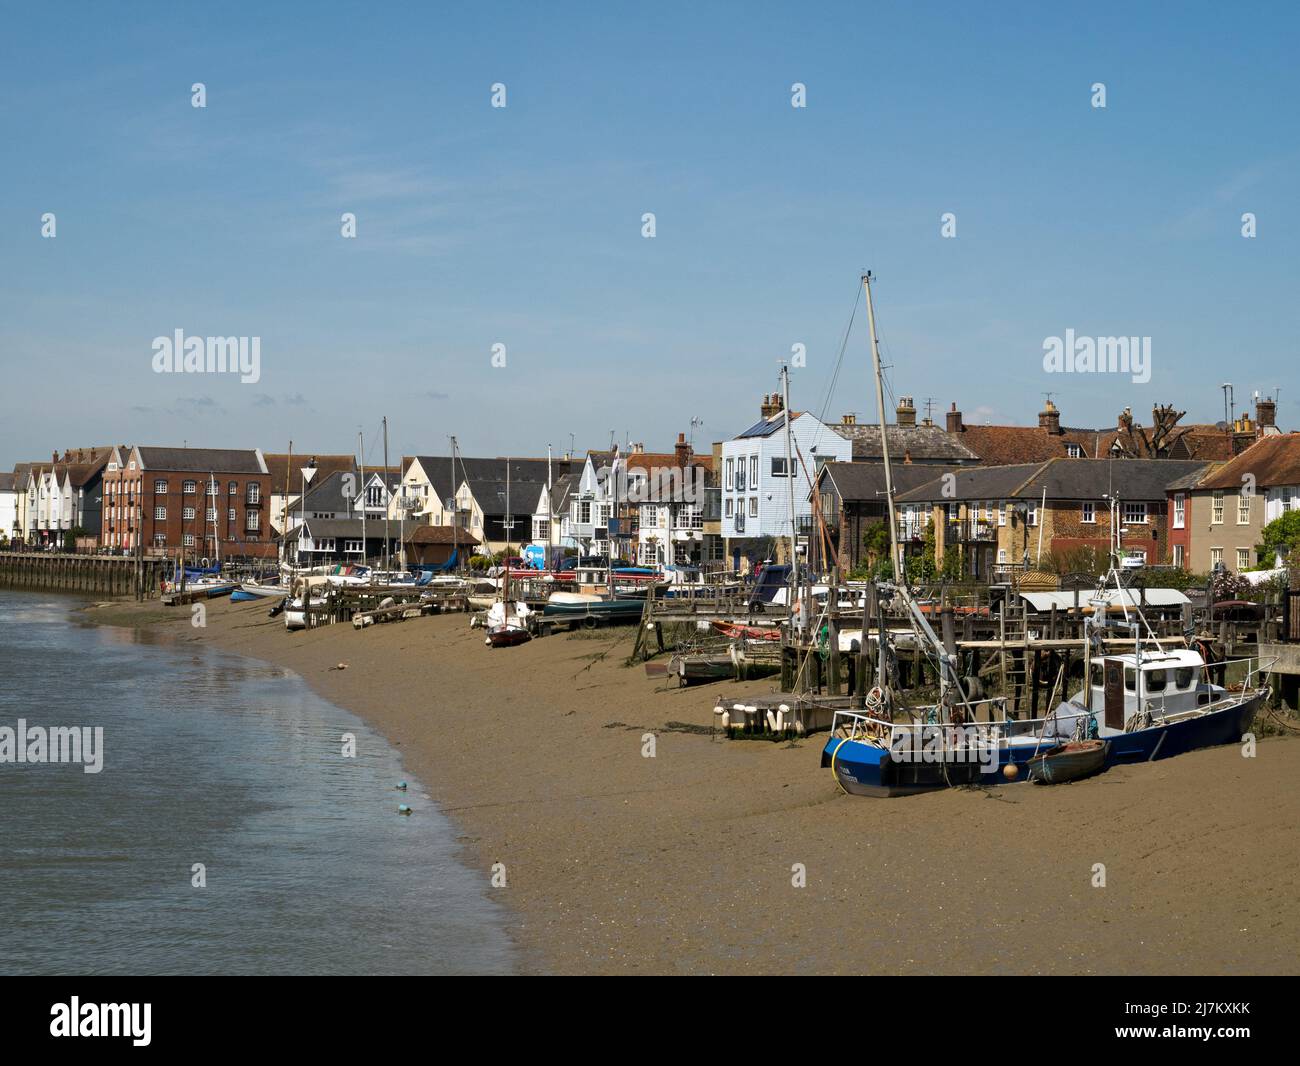 The Waterfront at Wivenhoe on the River Colne, with its ancient buildings with moored boats,  Wivenhoe, Essex, England, UK Stock Photo